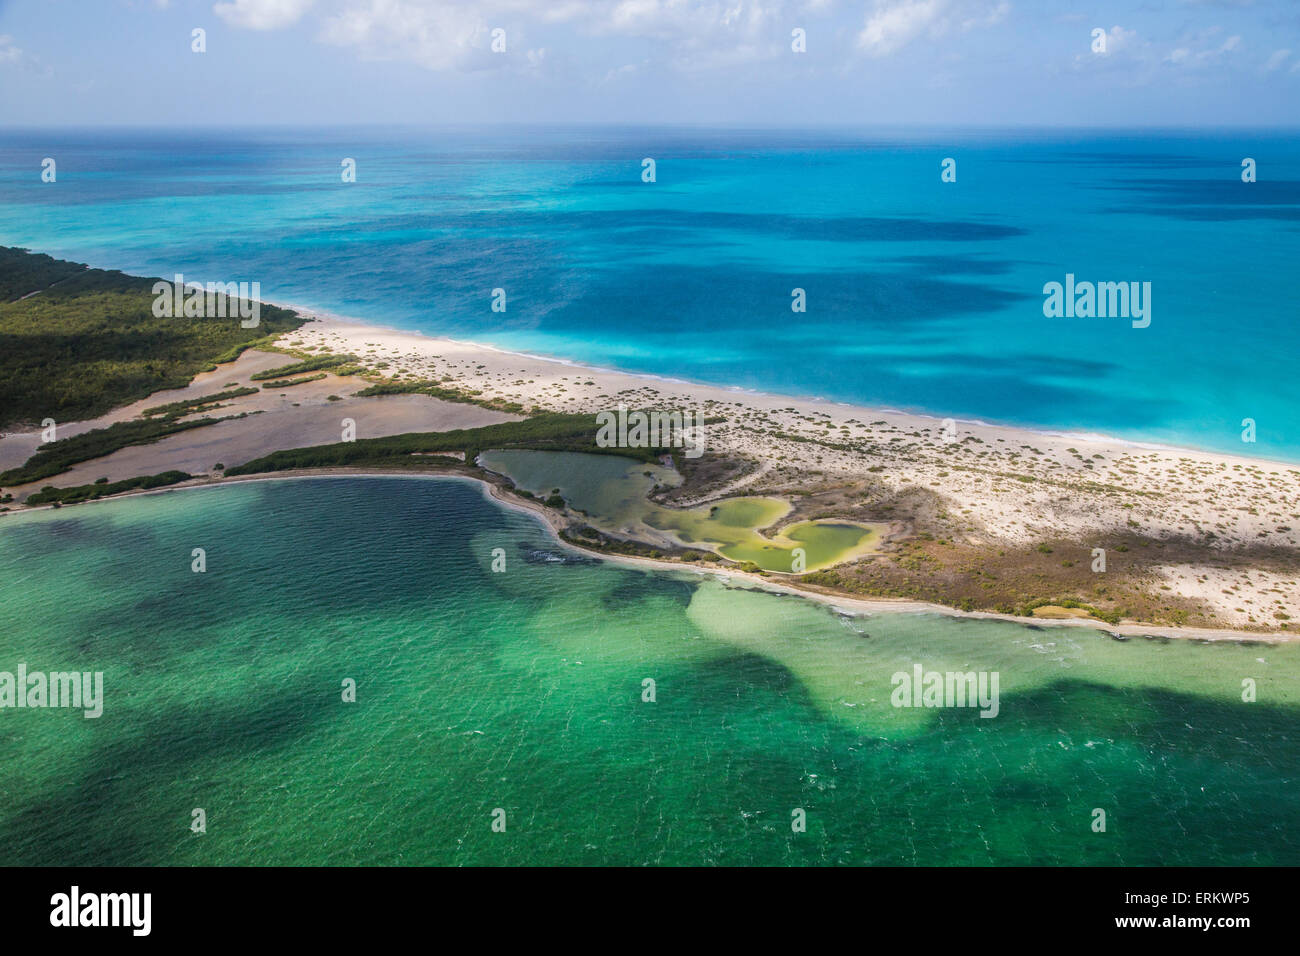 View of a corner of Barbuda, the Frigate Bird Sanctuary touches a thin strip of sand that separates the Caribbean Sea, Barbuda Stock Photo